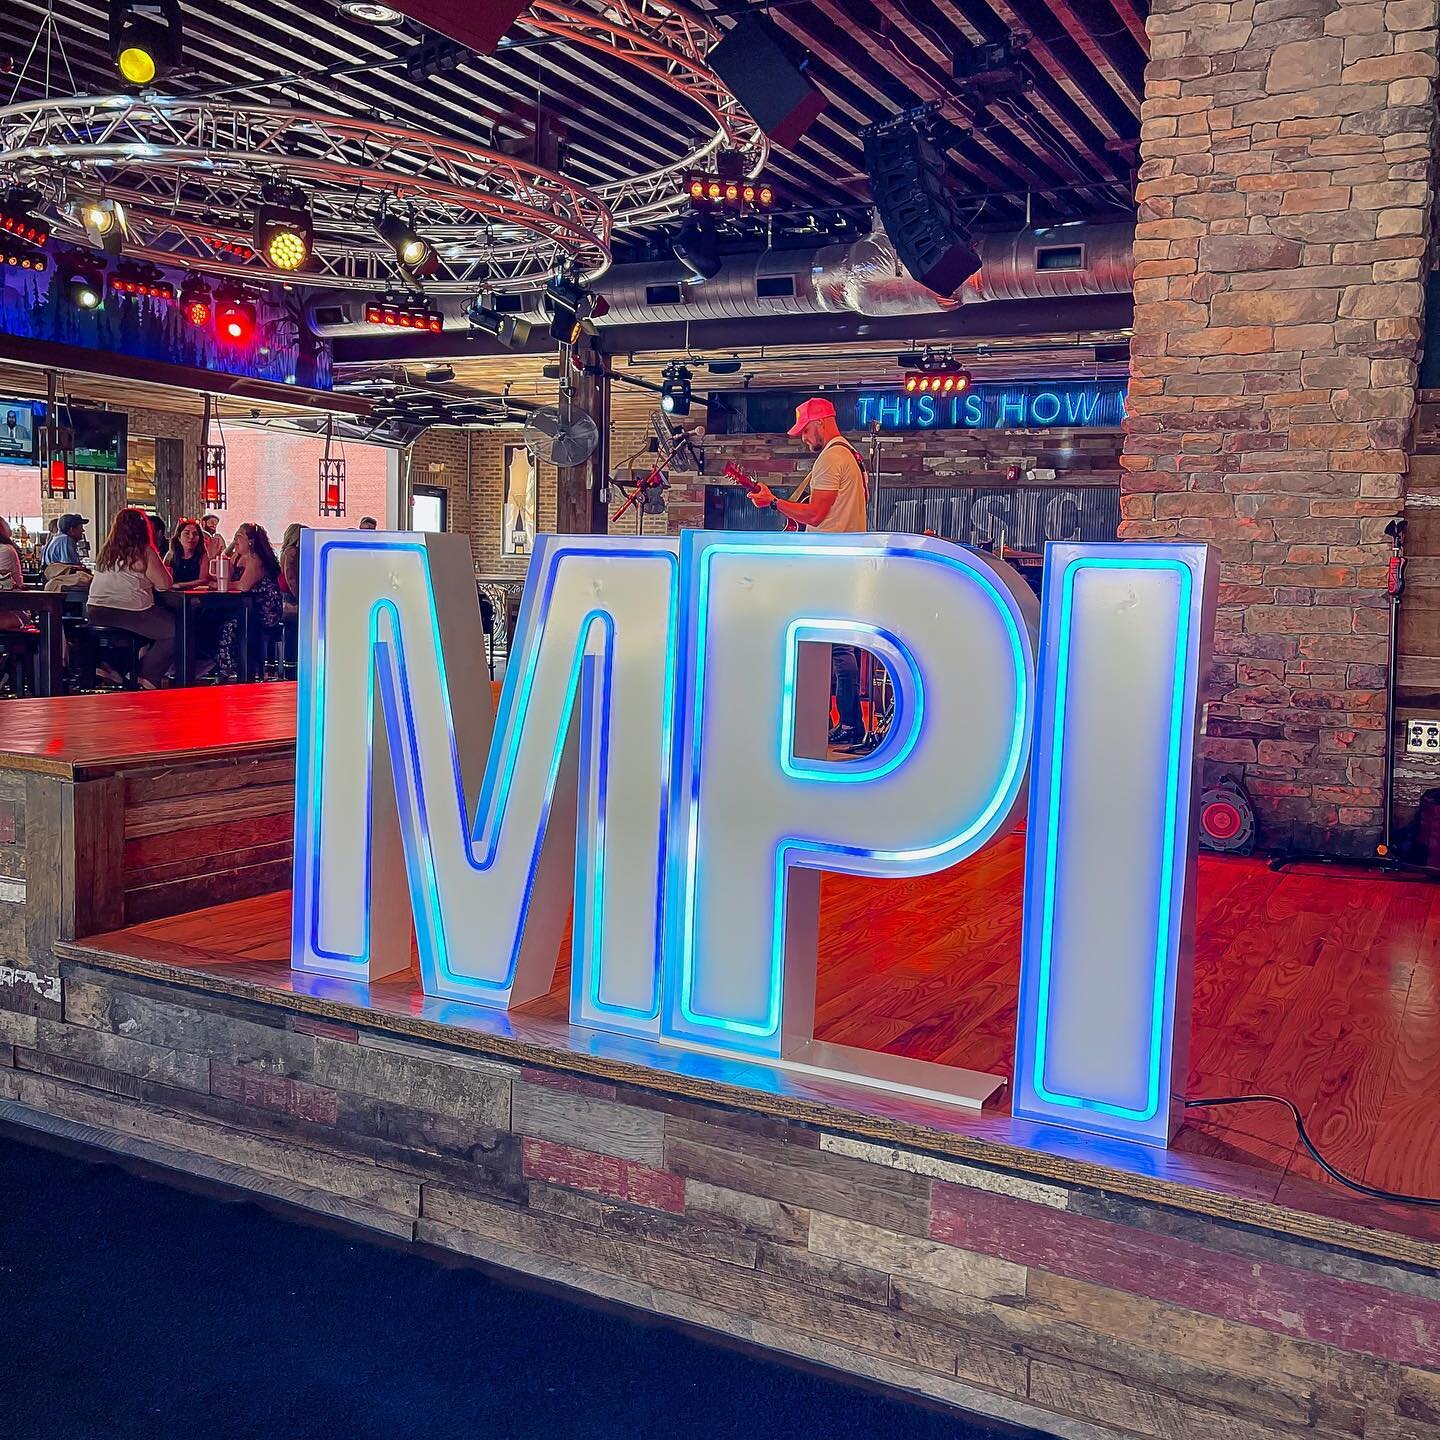 Lit up the stage at @fglhouse yesterday for the @mpitnchapter social event! 
💙🤍🩵
Good times were had by all!
.
#LedMarquee #LedMarqueeNashville #MarqueeLetters #NashvilleEvents #NashvilleTN #NashvilleWeddings #EventRentalsNashville #CorporateEvent